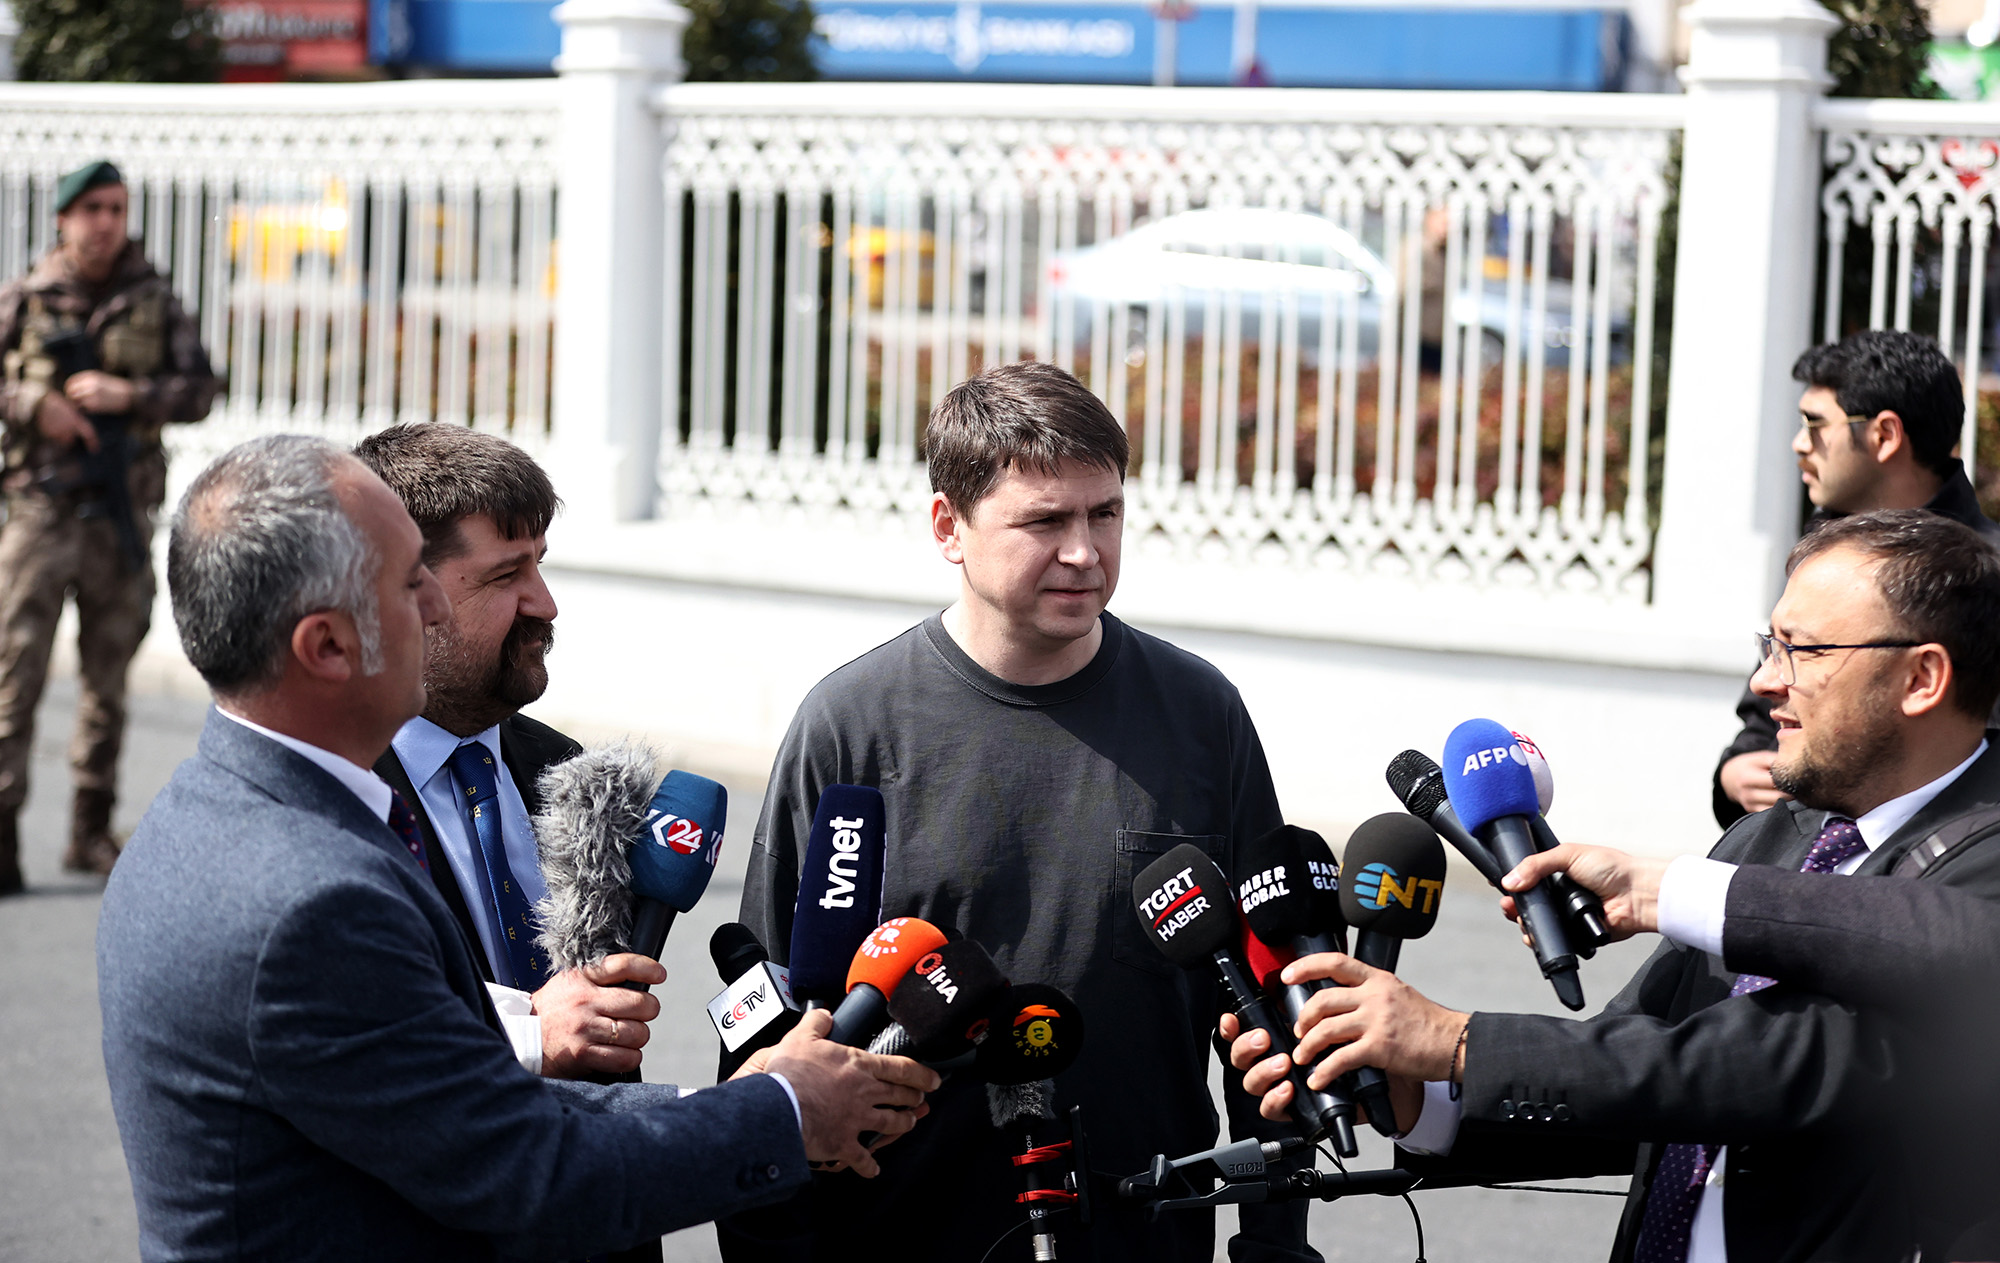 Ukrainian delegation member Mykhailo Podolyak makes a press statement after talks between delegations from Russia and Ukraine at the Dolmabahce Presidential Office in Istanbul, Turkey, on March 29.